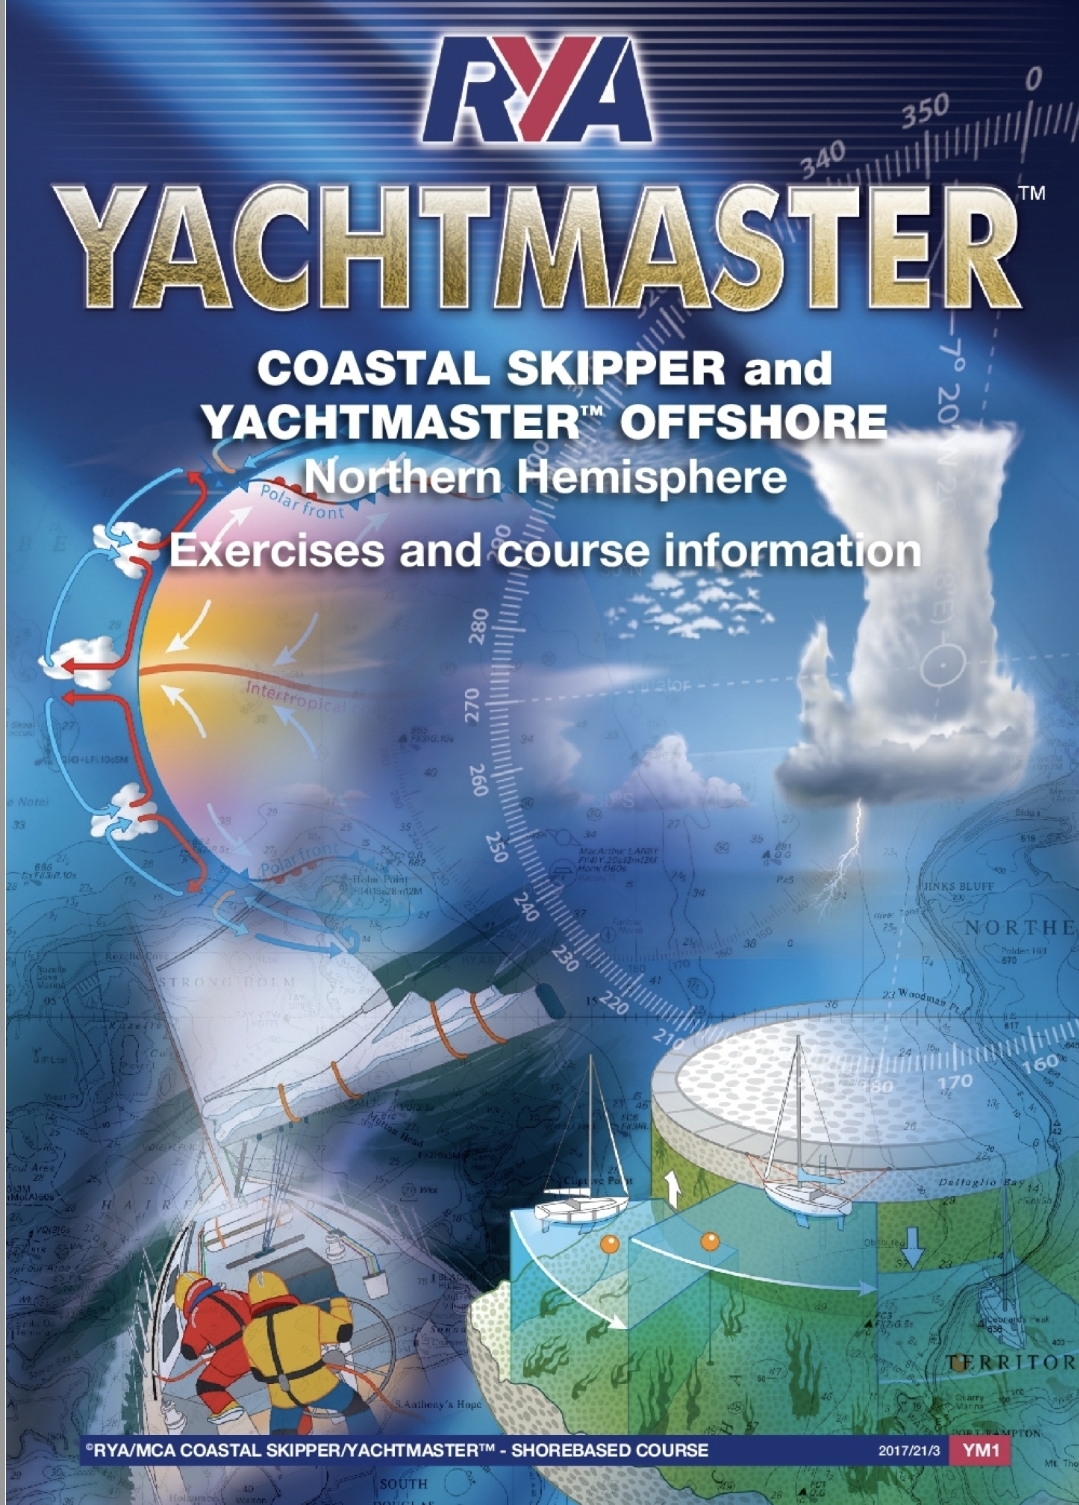 yachtmaster theory test